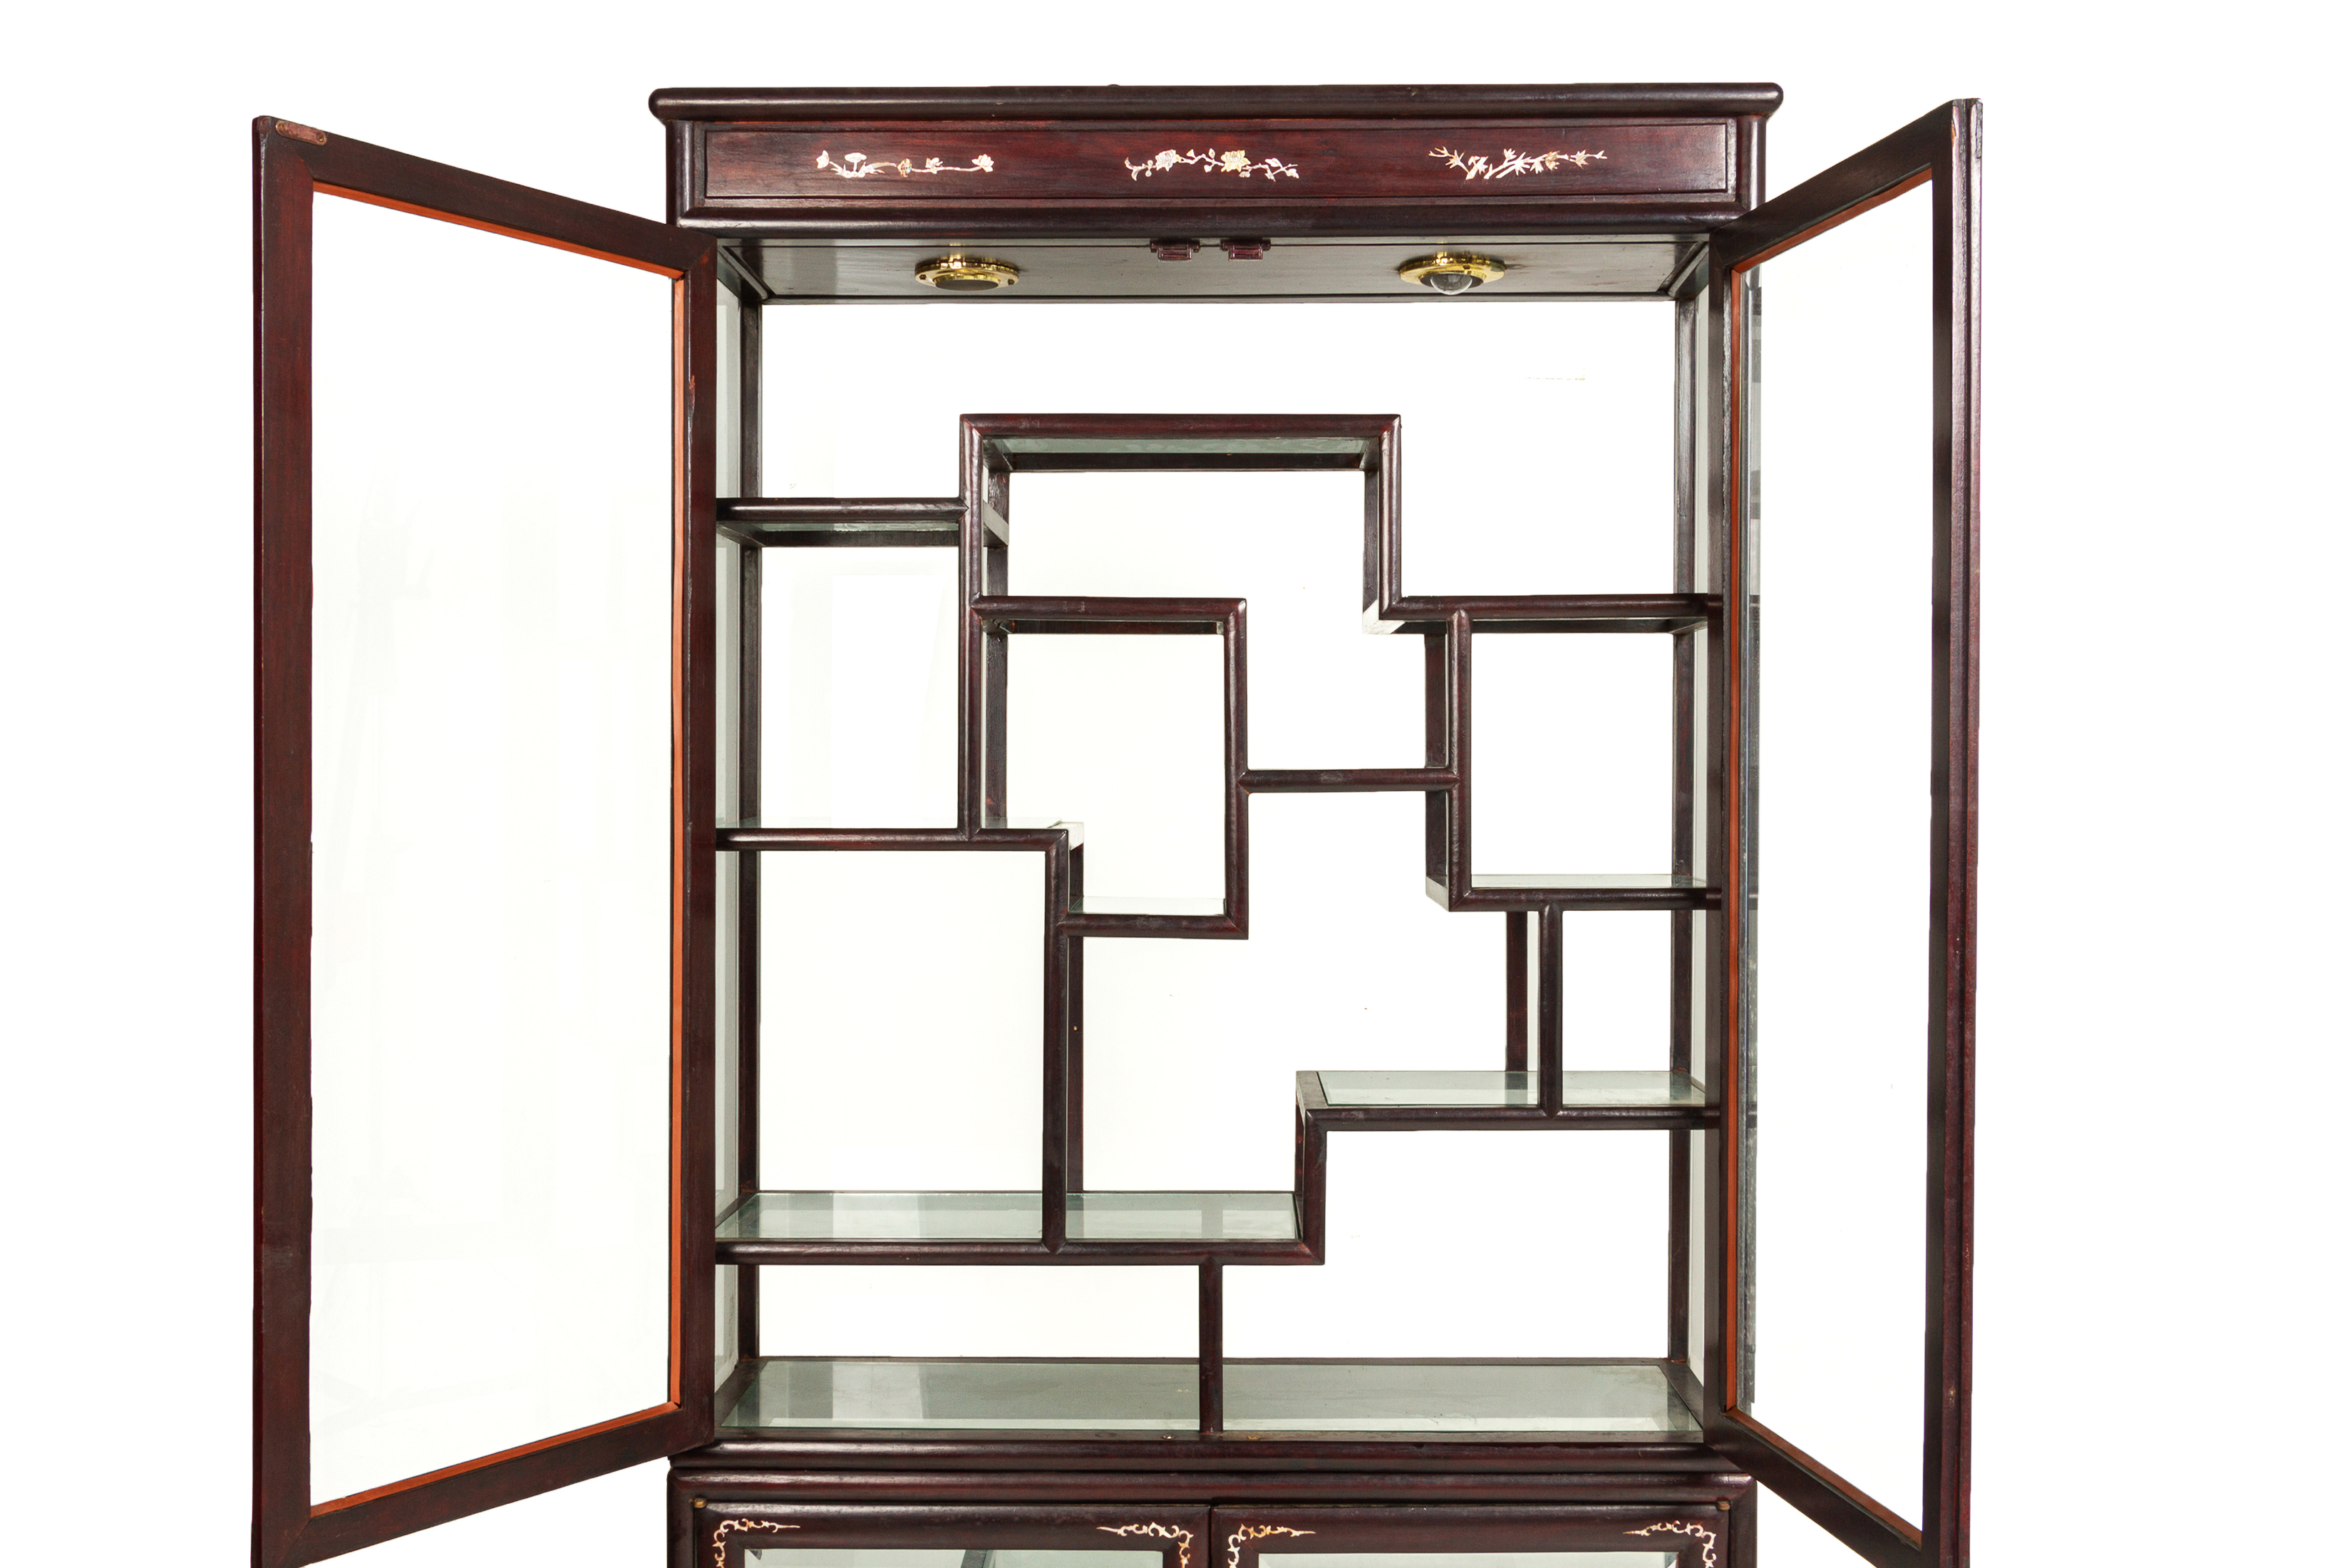 A MOTHER OF PEARL INLAID HARDWOOD GLAZED DISPLAY CABINET - Image 2 of 3